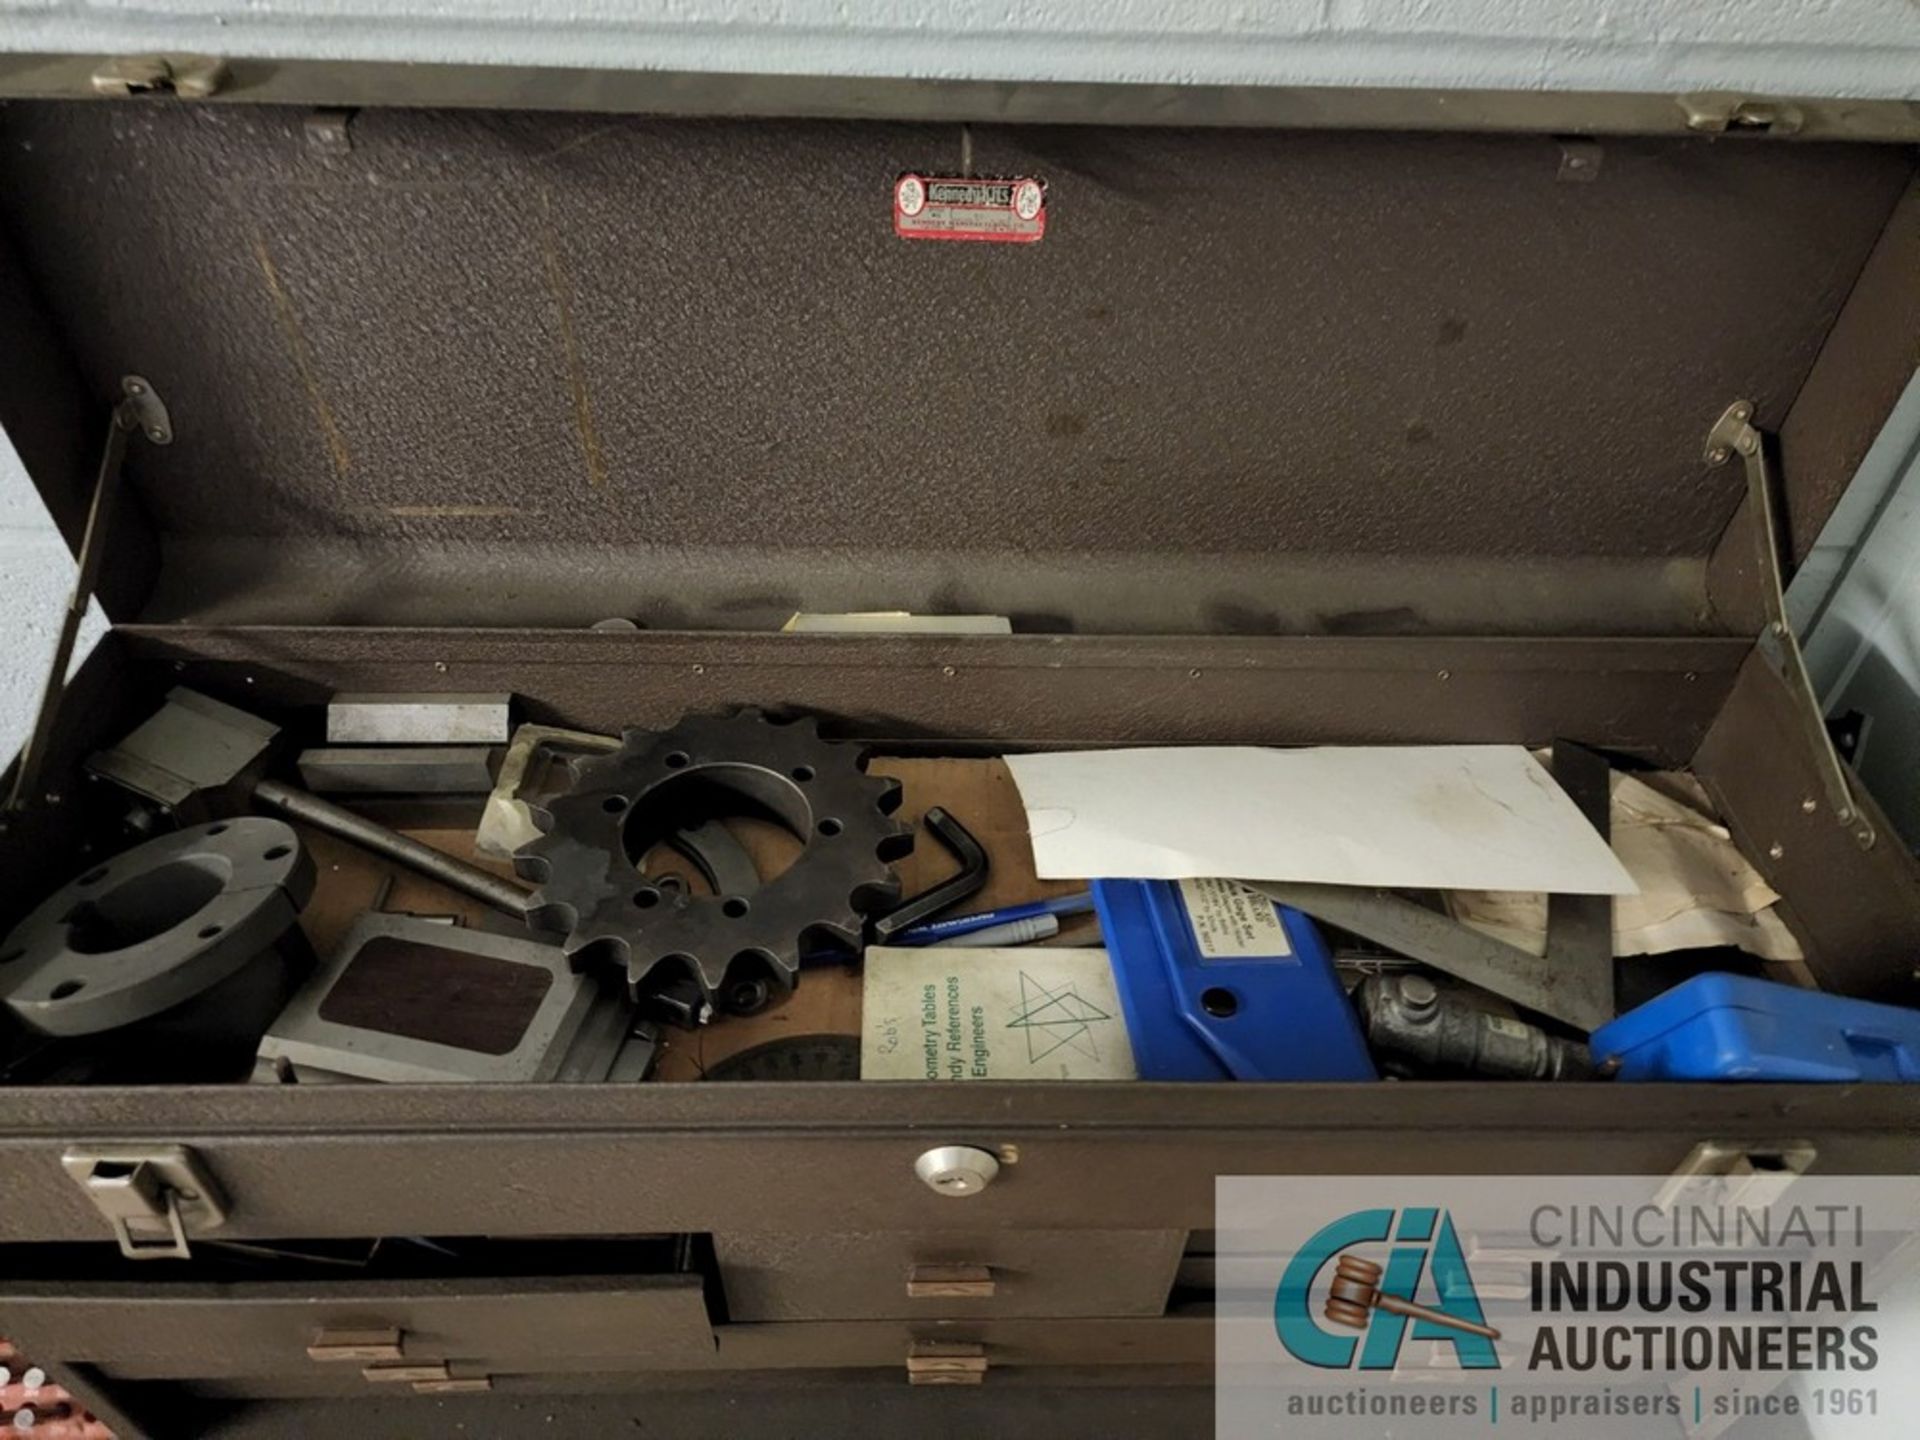 (LOT) KENNEDY TOOL BOX W/ SMALL MOUNT OF INSPECTION ITEMS, PIN GAGE INDEX, PIGEON HOLE CABINET W/ - Image 2 of 11